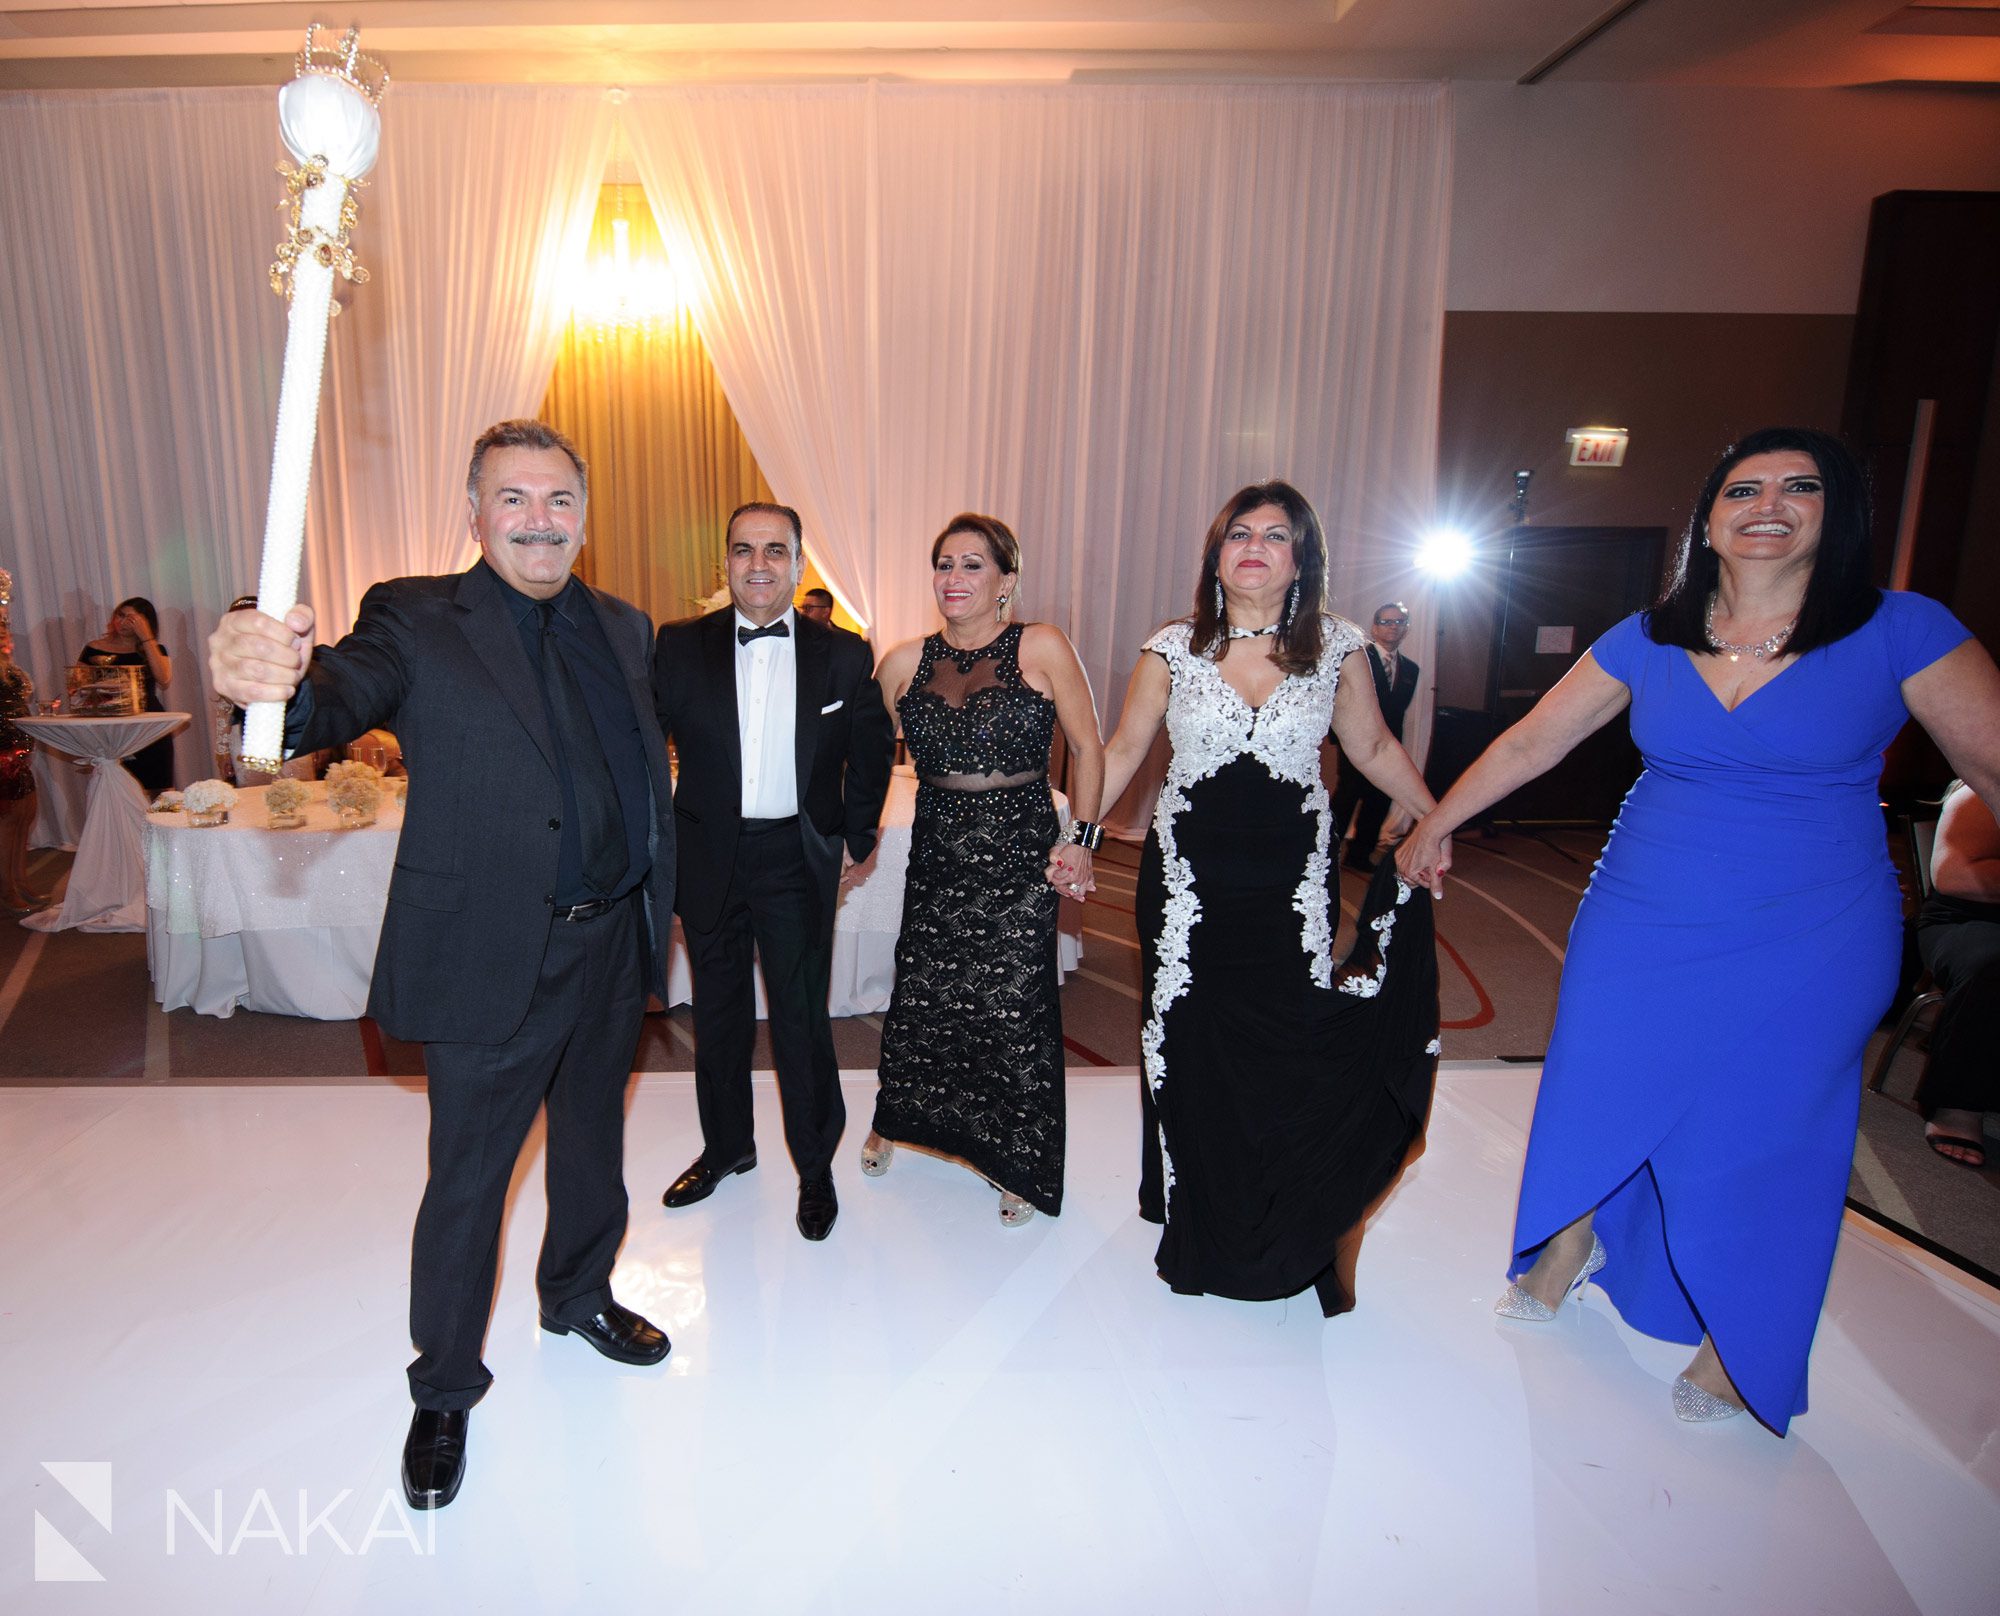 loews chicago ohare wedding reception picture assyrian dancing